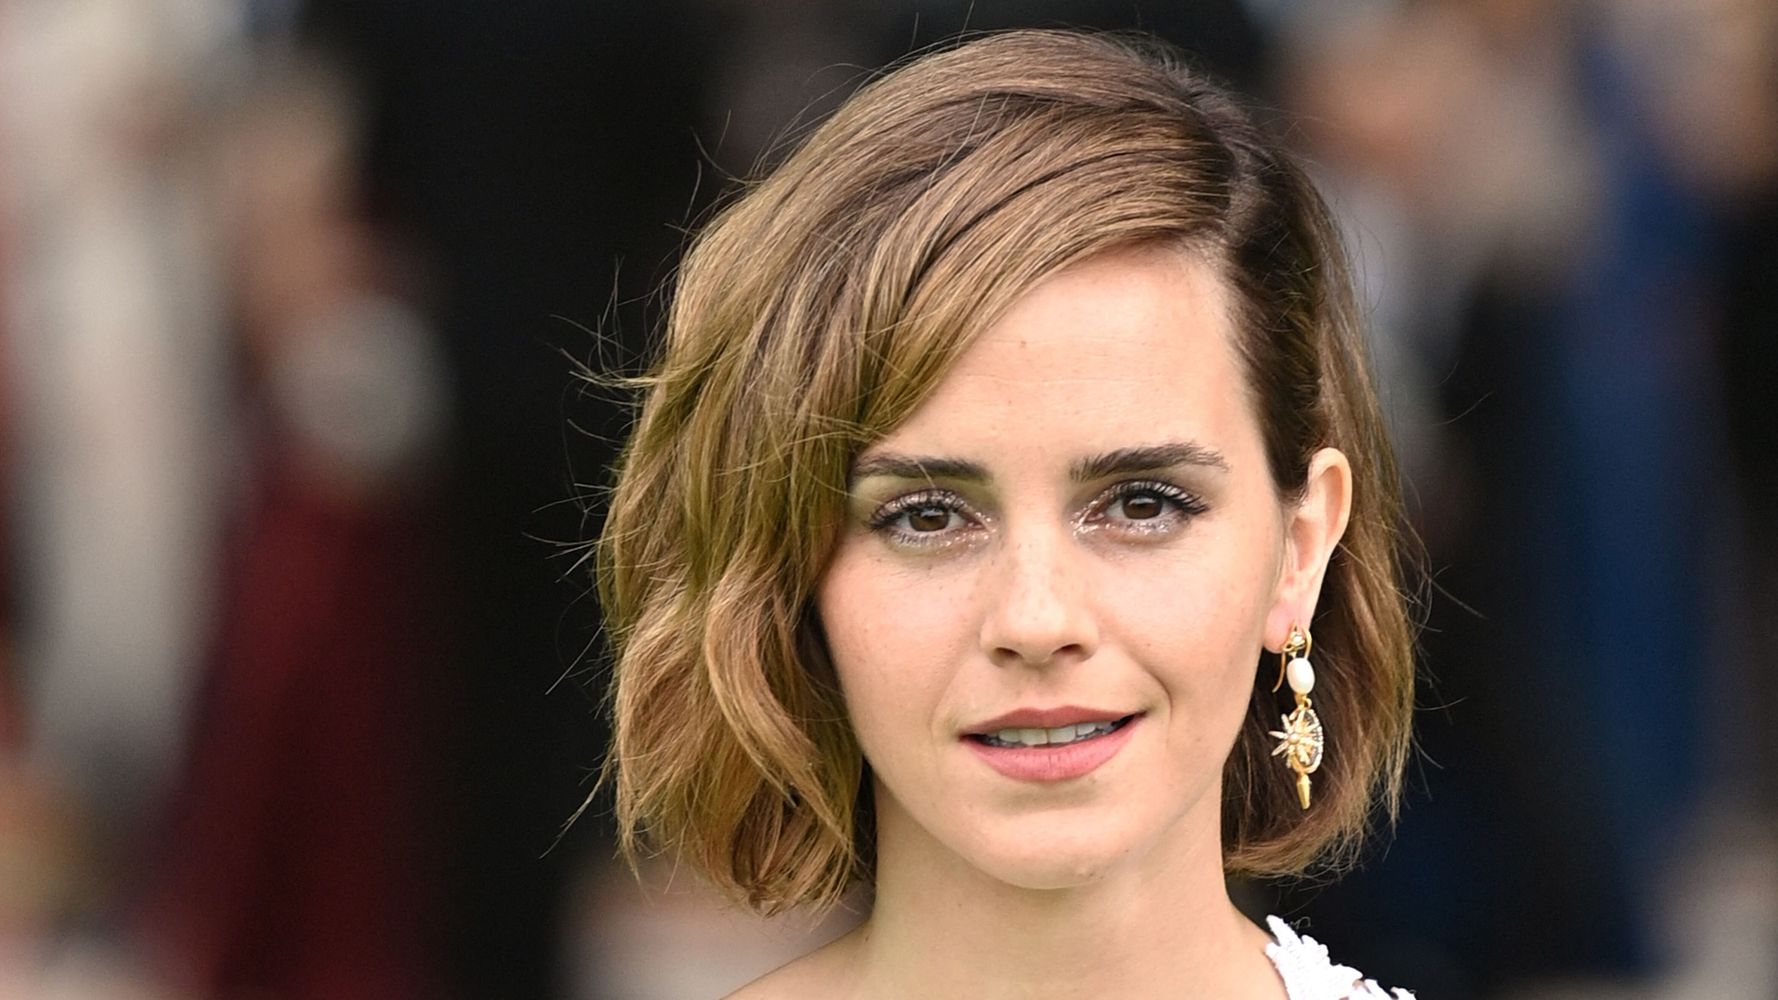 Emma Watson Praised For Resurfaced Comments About Trans Women Using Public Restrooms Huffpost Entertainment